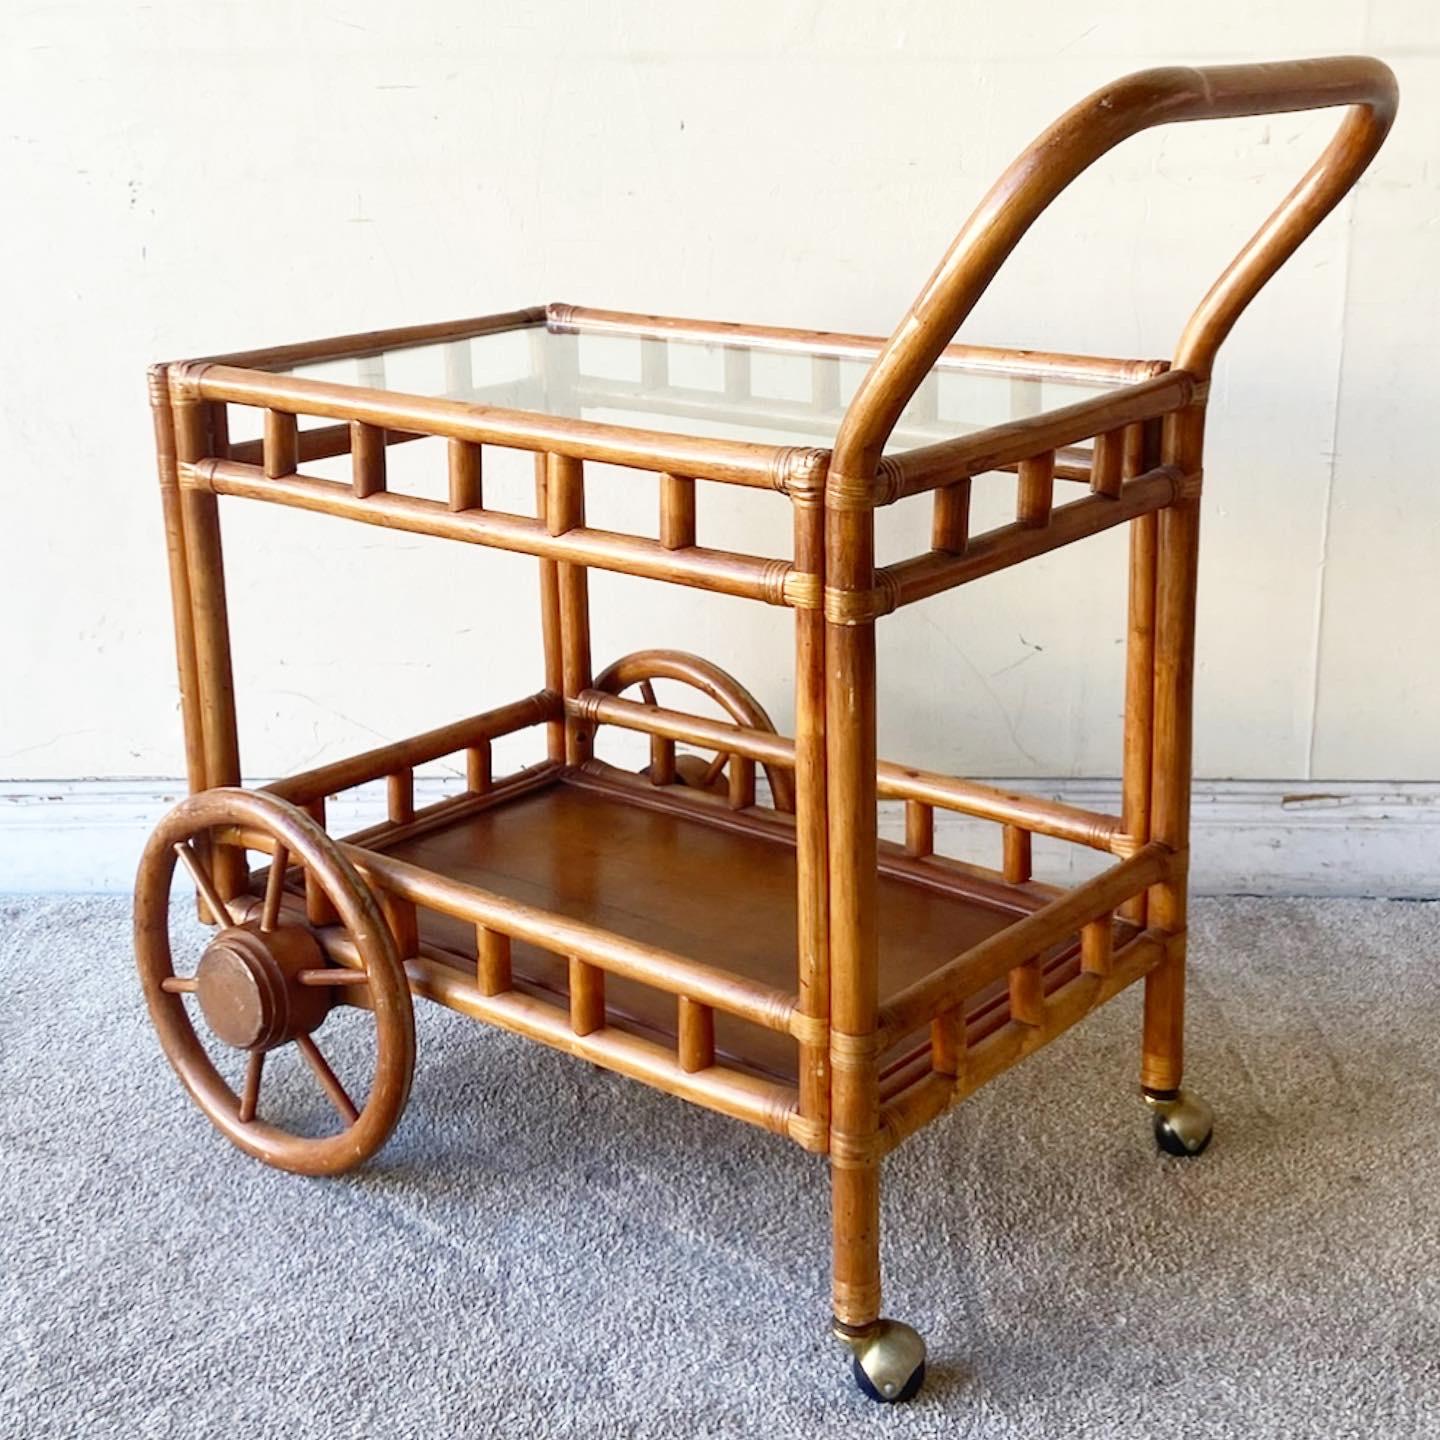 Incredible vintage bohemian wagon bar cart. Feature a bamboo frame with rattan jointing with a glass top tier and wooden lower tier.